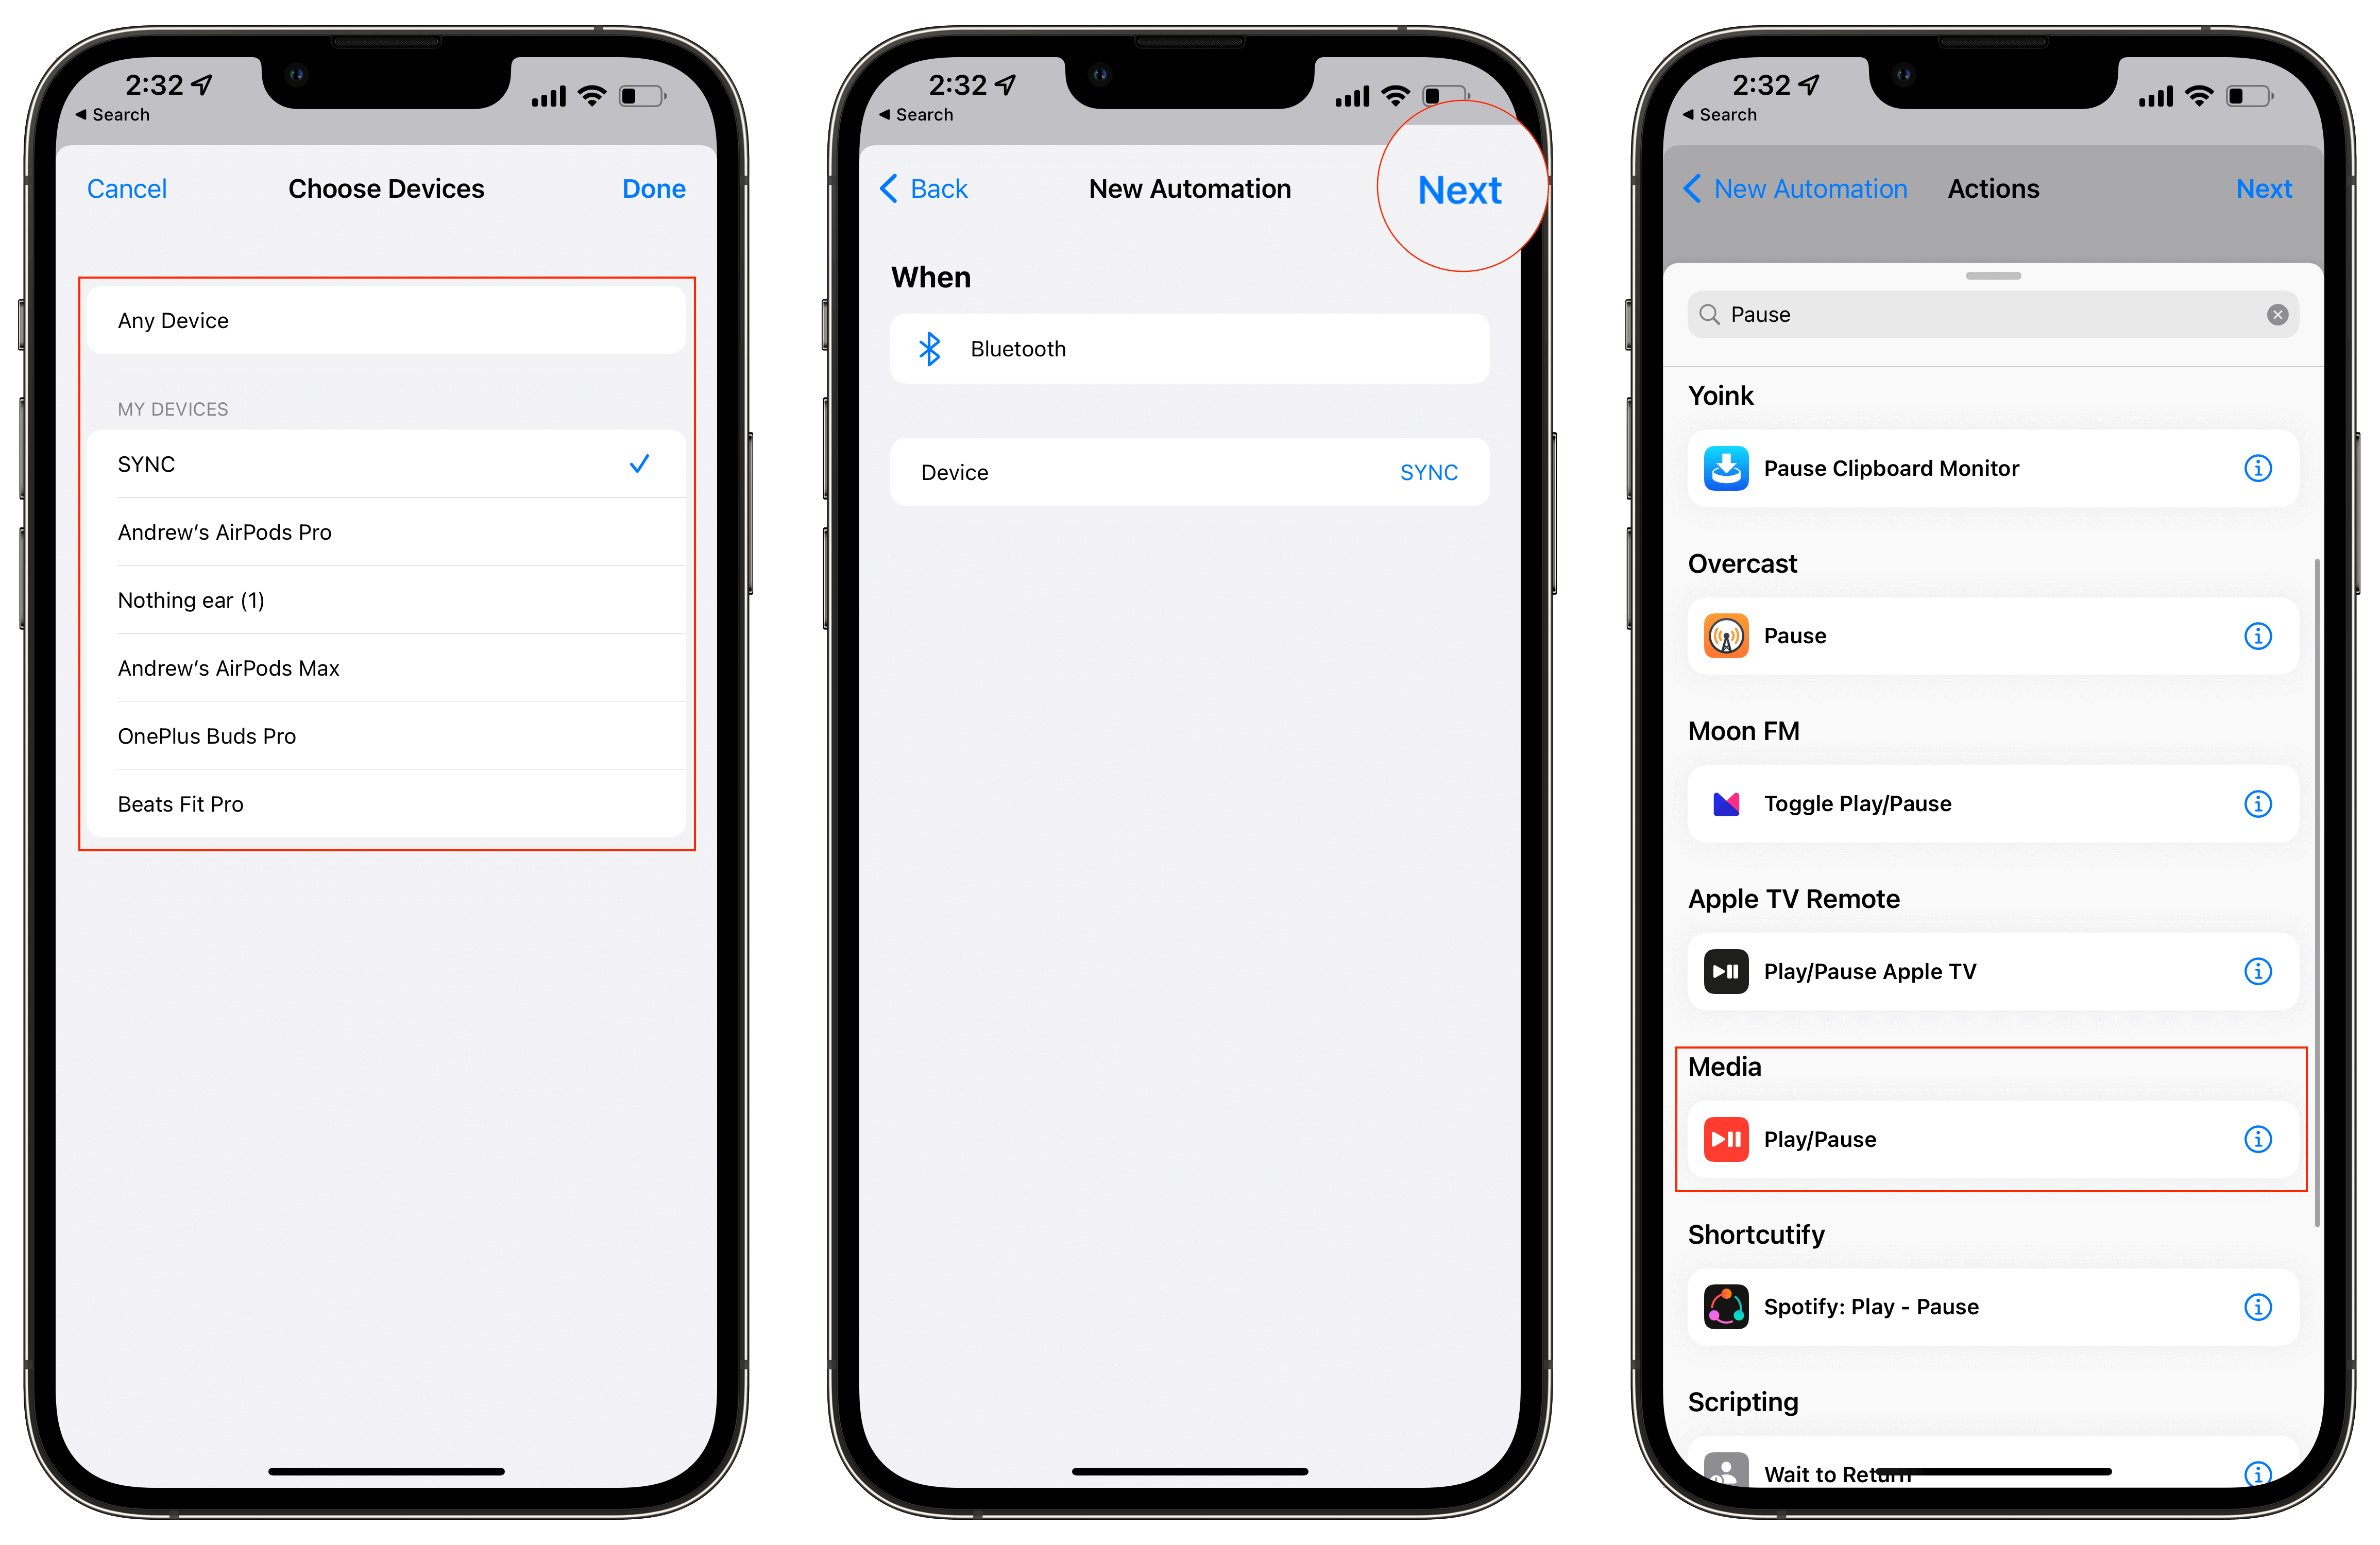 How To Stop Apple Music From Automatically Playing Shortucts - 2